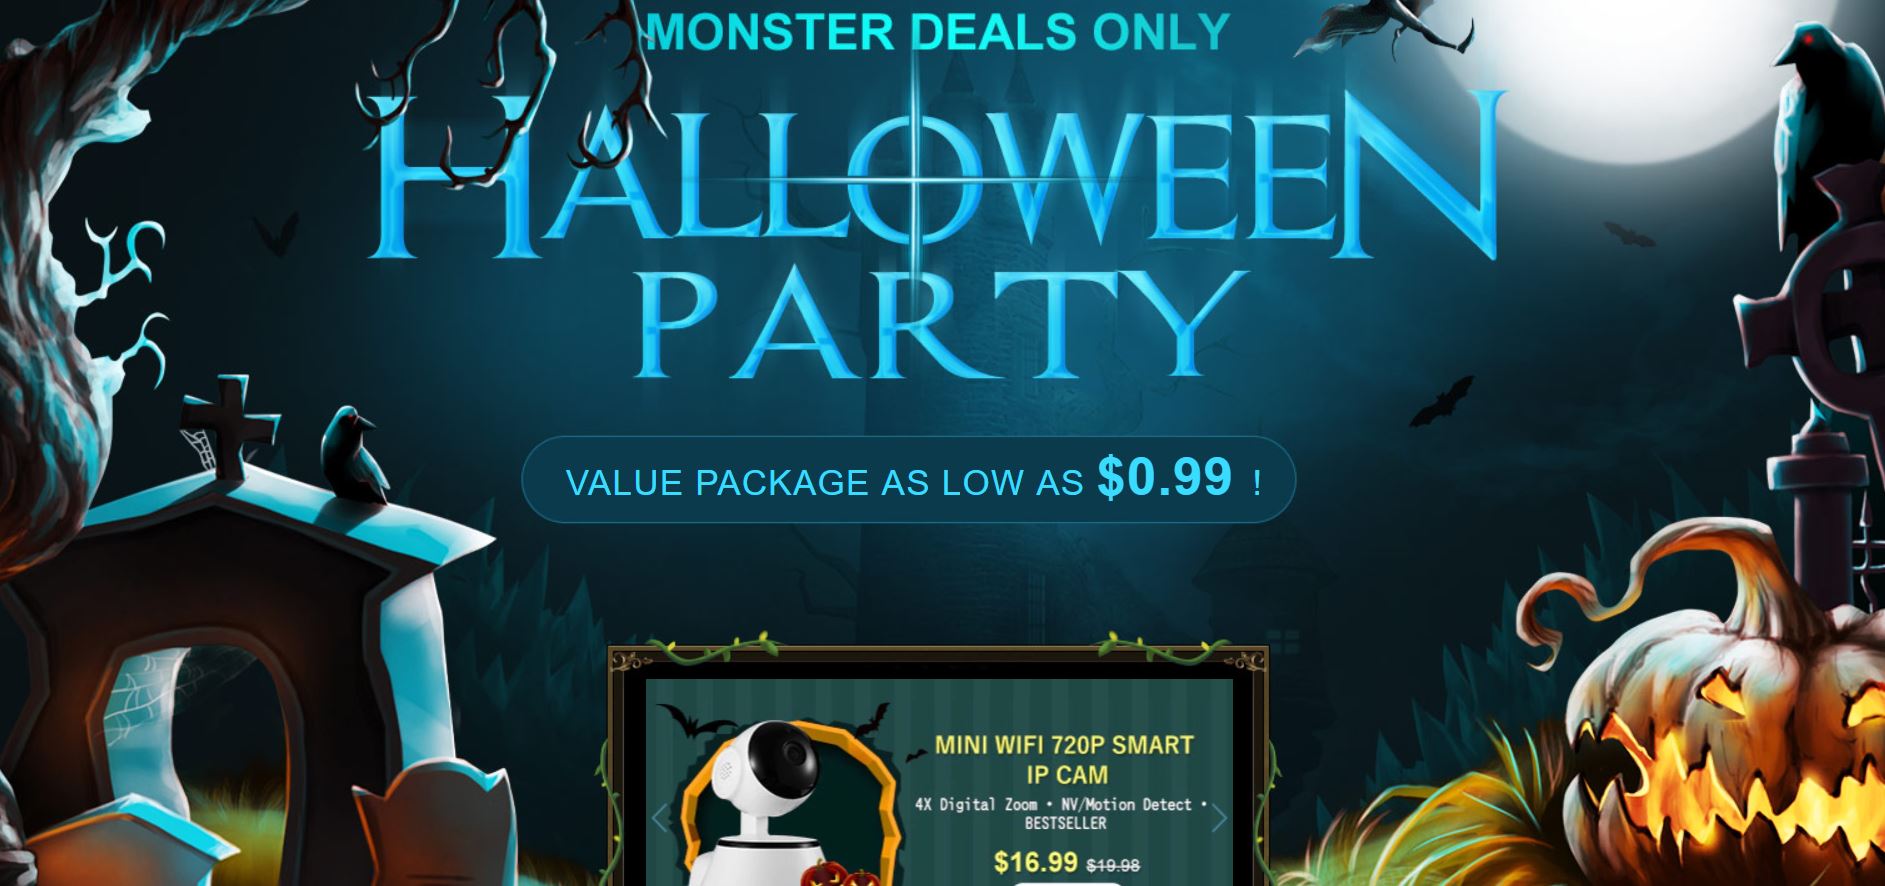 GearBest Halloween Party Gear Flash Sale Best Offers and Coupon Code 3